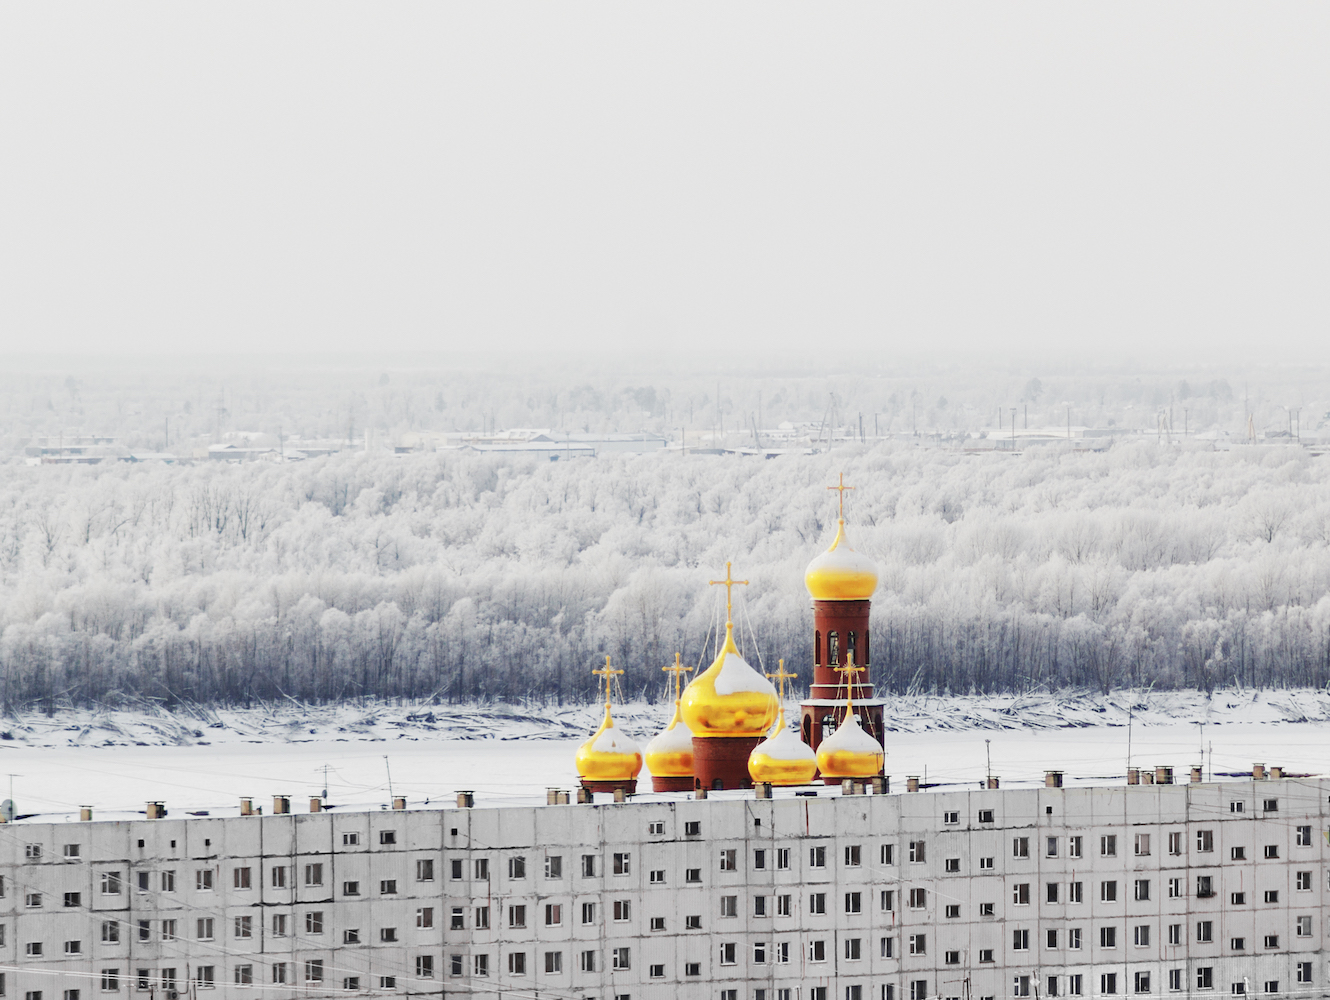 A journey across Russia – in photos